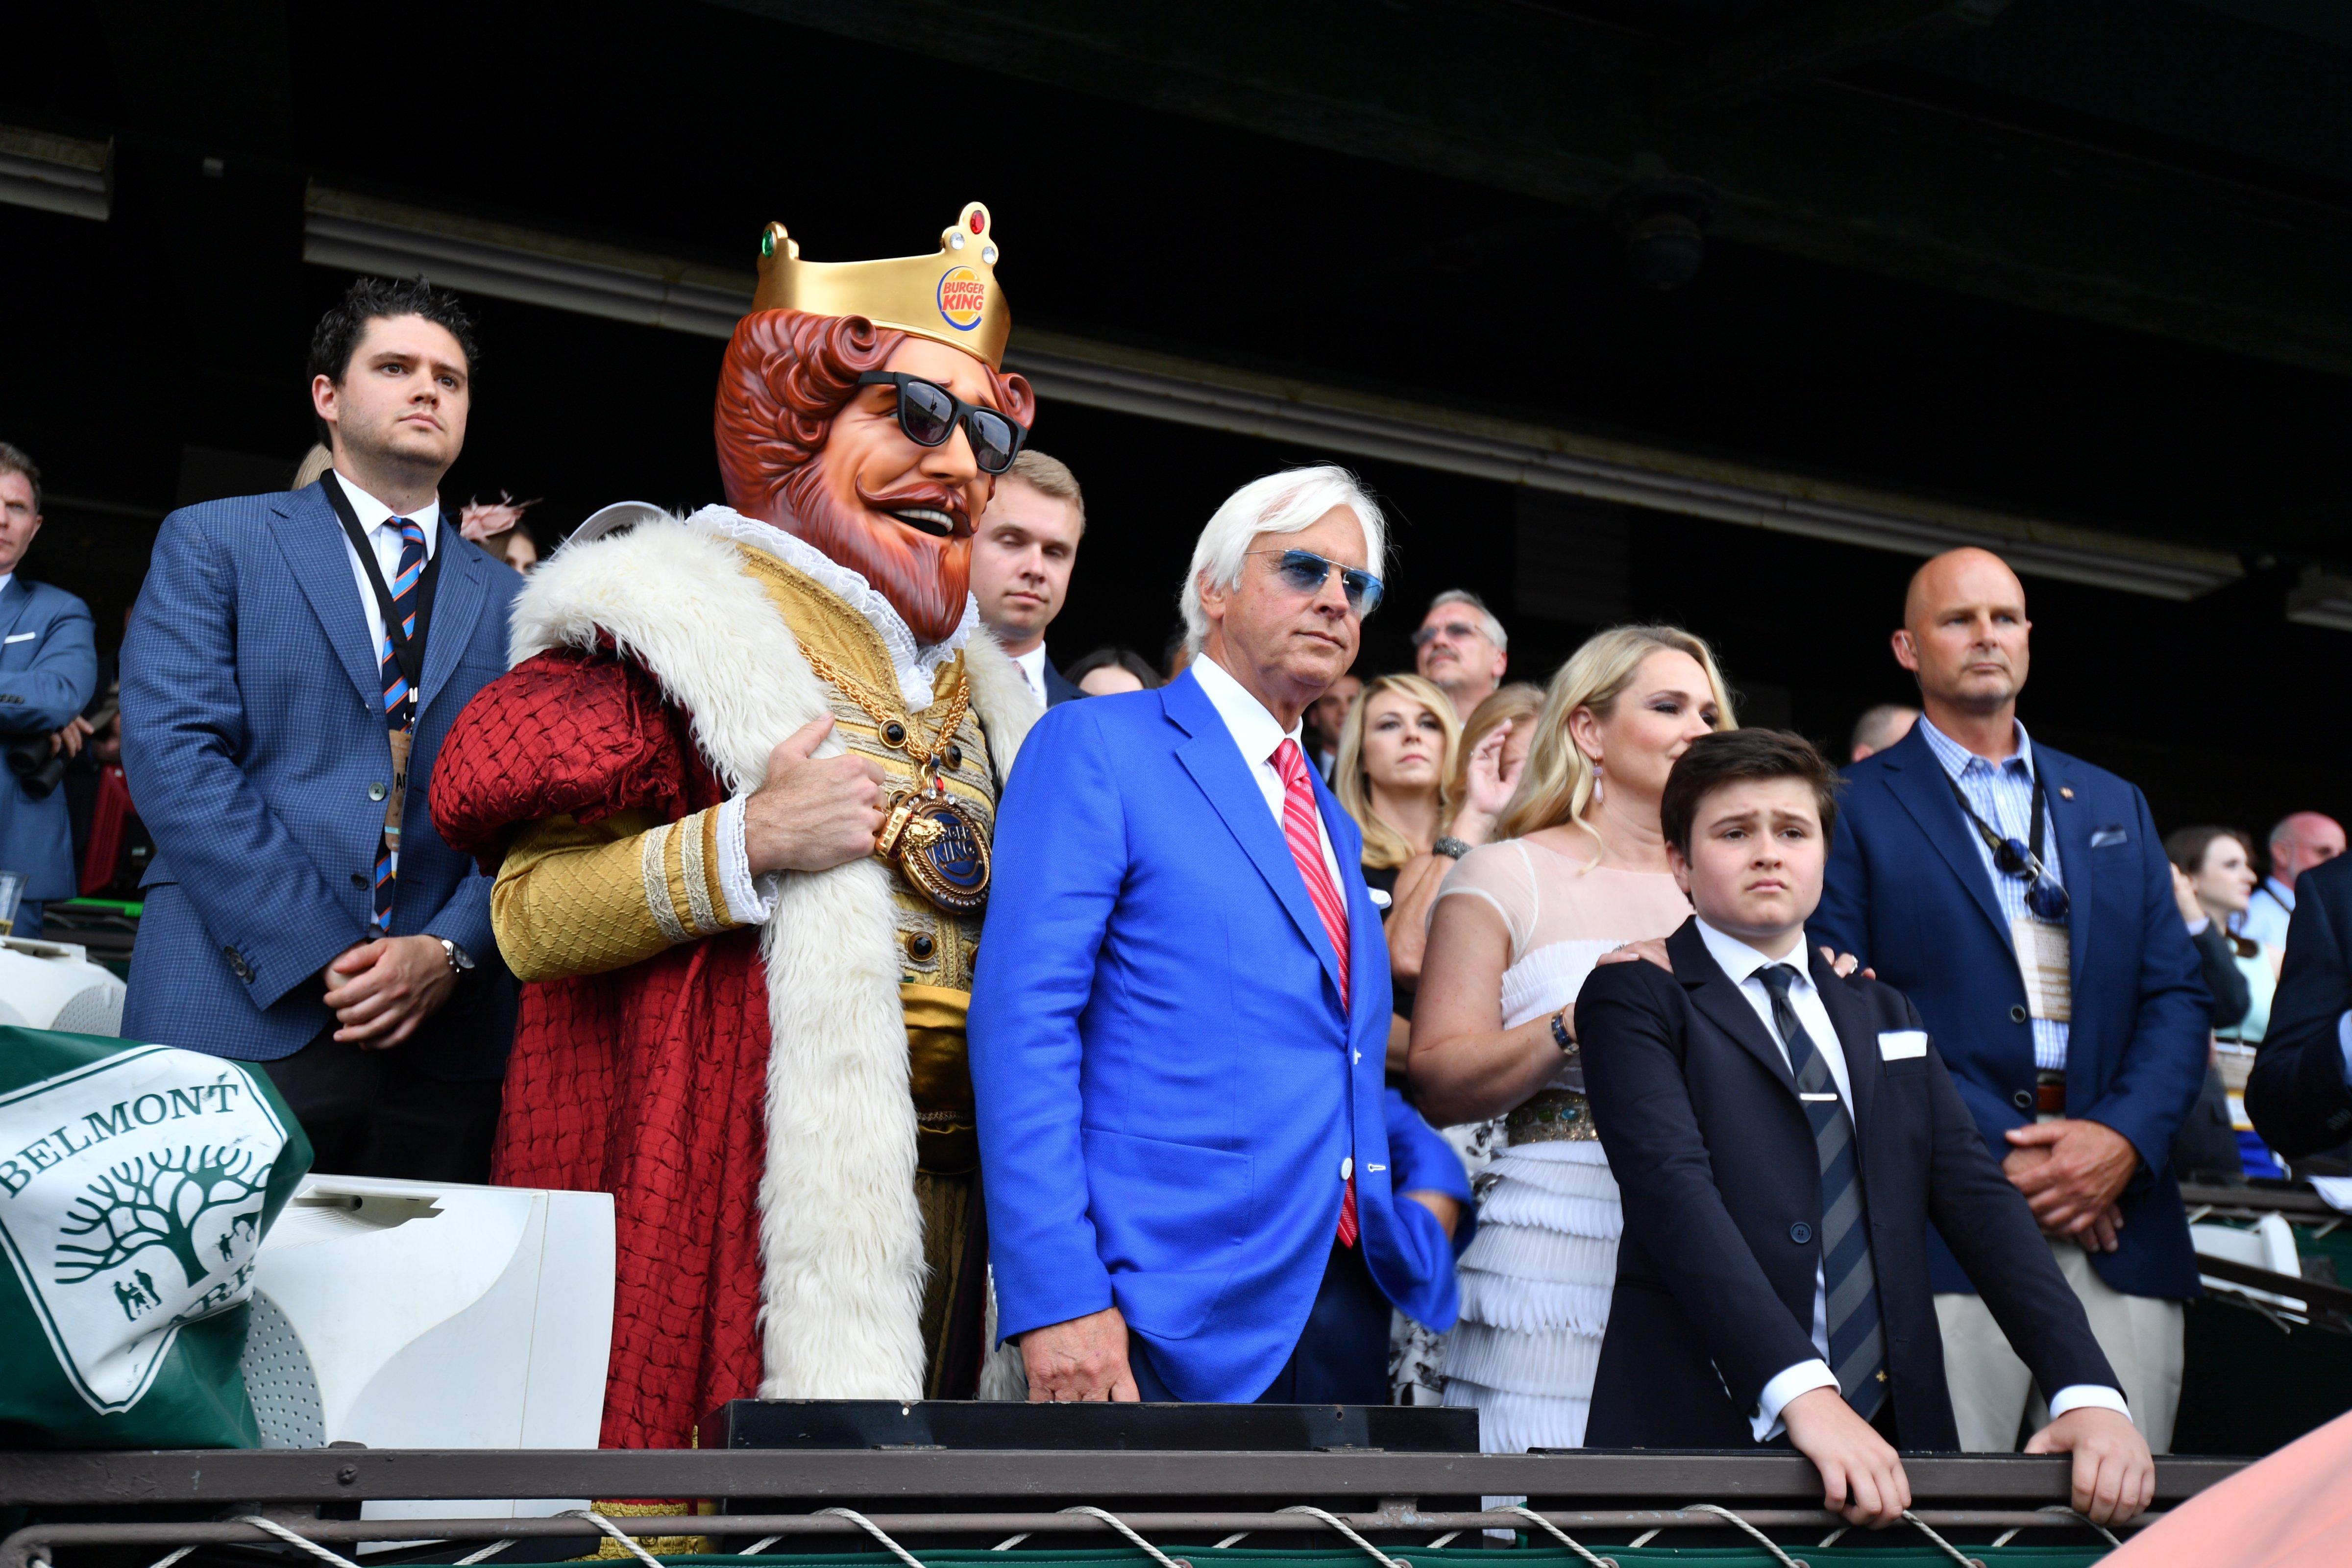 Trainer Bob Baffert and family before Justify wins the Belmont Stakes and Triple Crown at Belmont Park Racetrack on June 09, 2018 in Elmont, New York (Horsephotos—Getty Images)